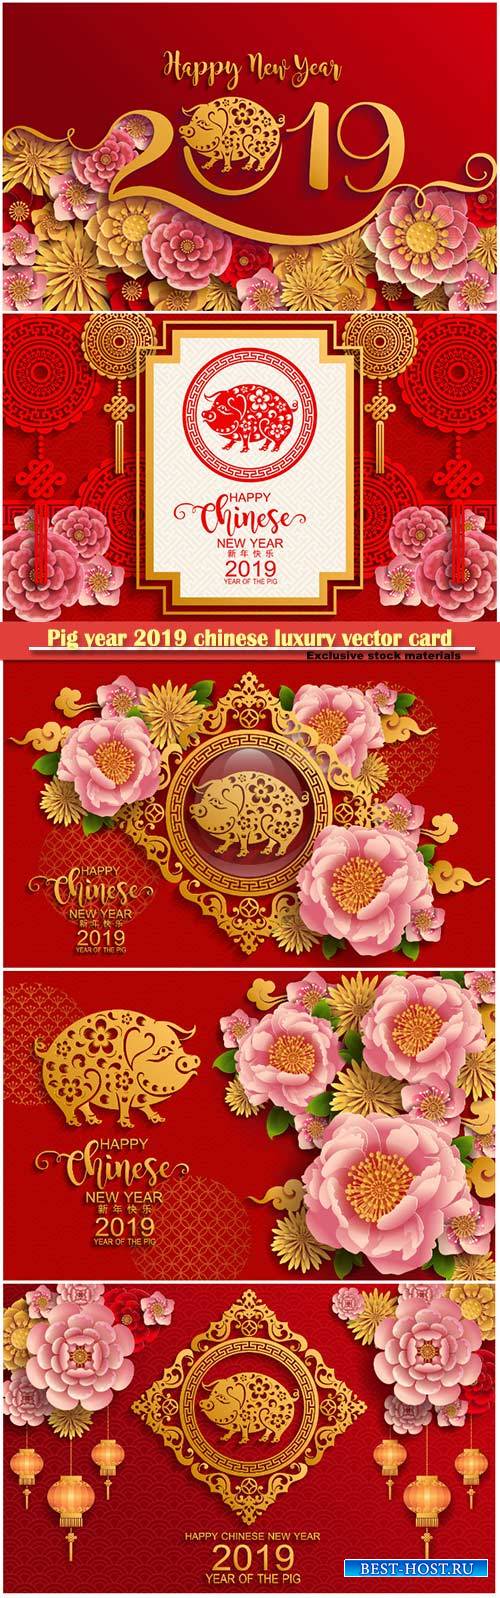 Pig year 2019 chinese luxury vector card # 3